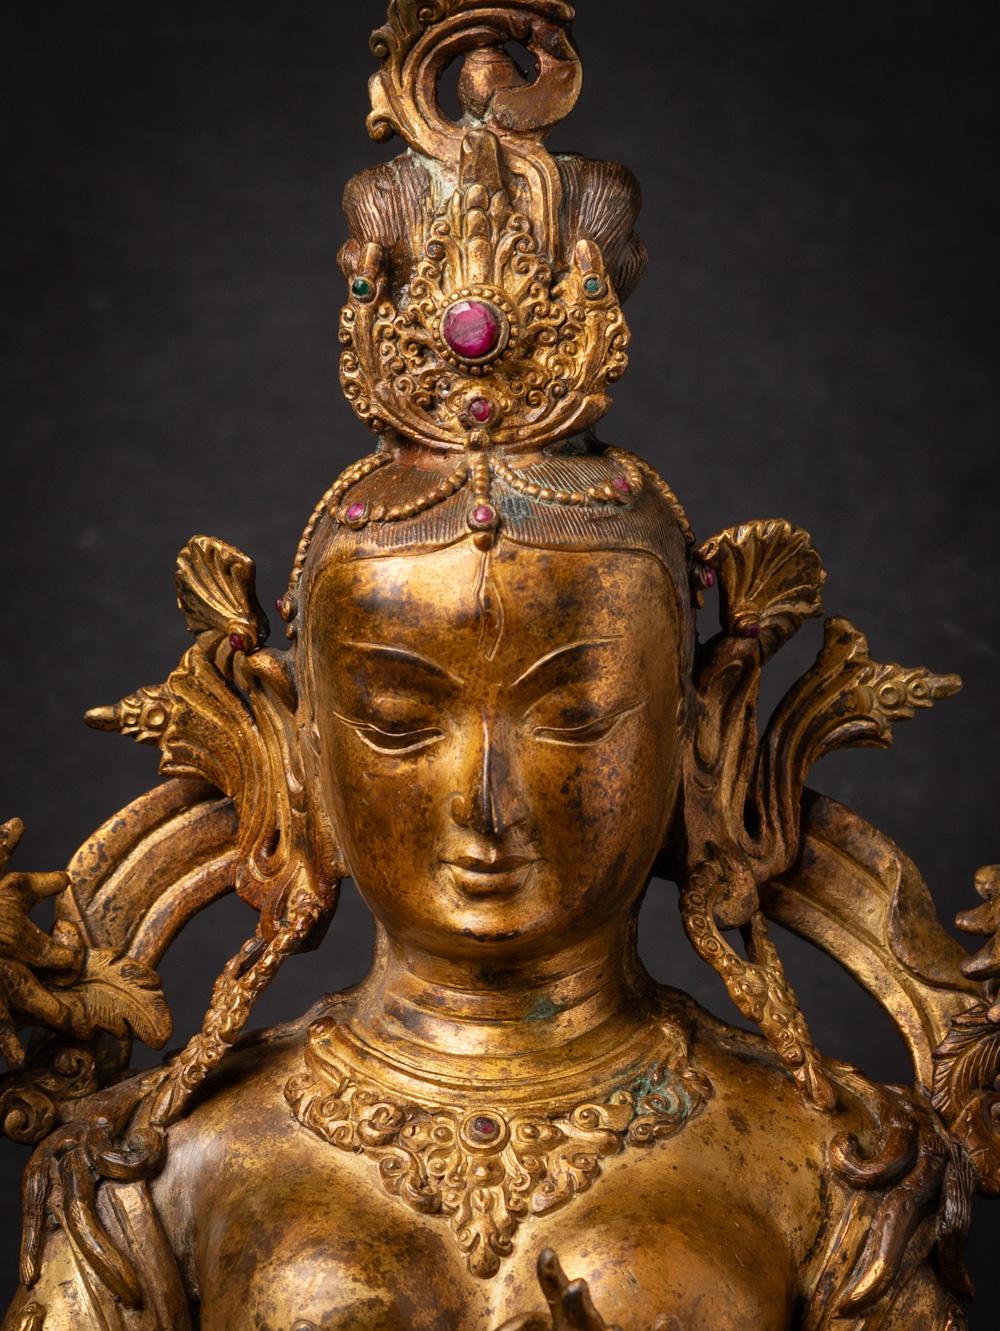 This Old bronze Nepali White Tara statue is a true masterpiece of craftsmanship and spirituality. Standing at a majestic 44,8 cm in height, with dimensions of 32,8 cm in width and 19,7 cm in depth, it is a substantial representation of the Medicine